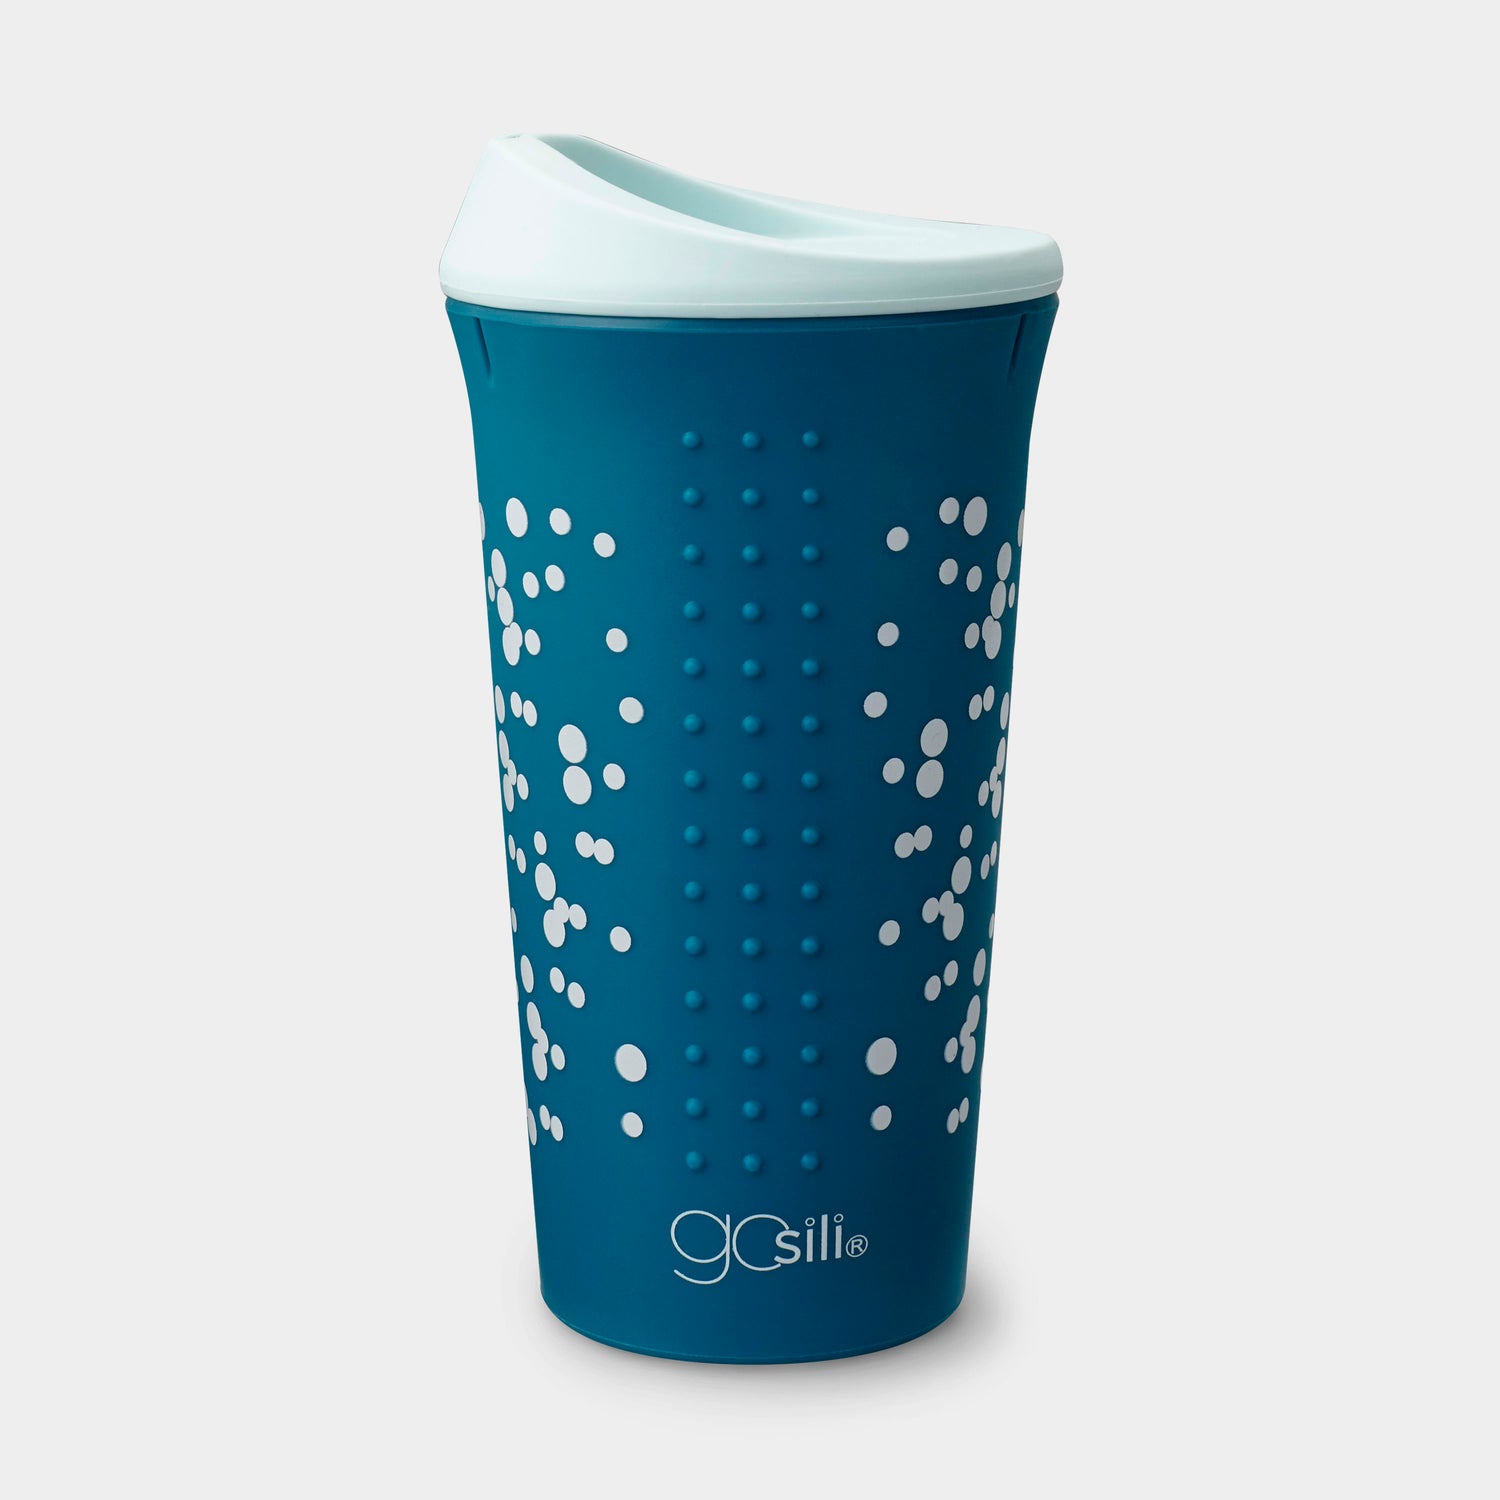 Silicone To-Go Cup, 16oz